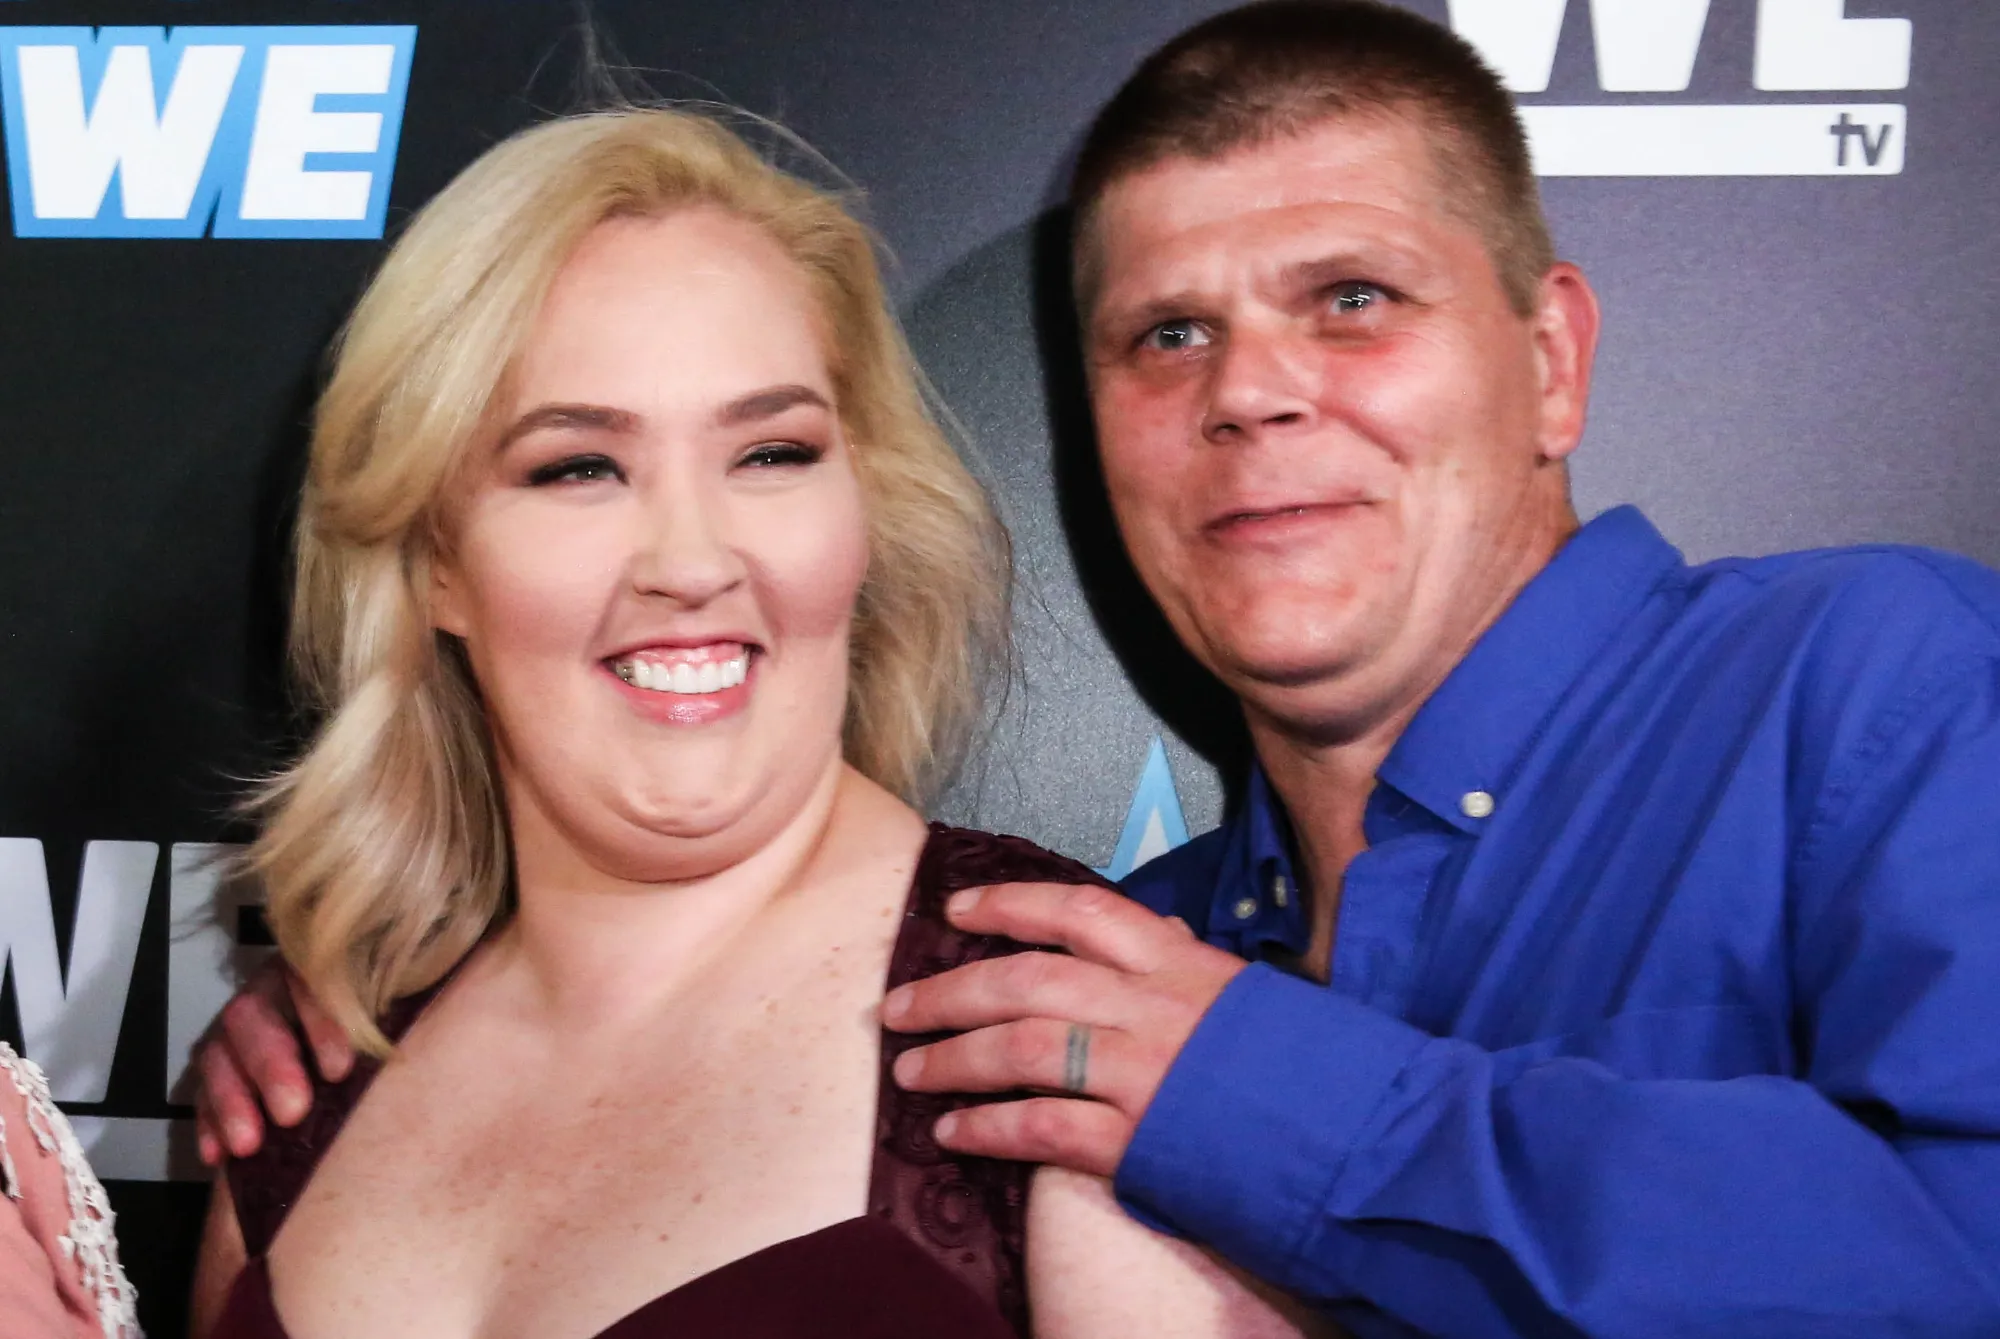 Mama June’s Ex, Geno Doak, Drops 70 Pounds In Stunning Turnaround After Suicide Attempt!